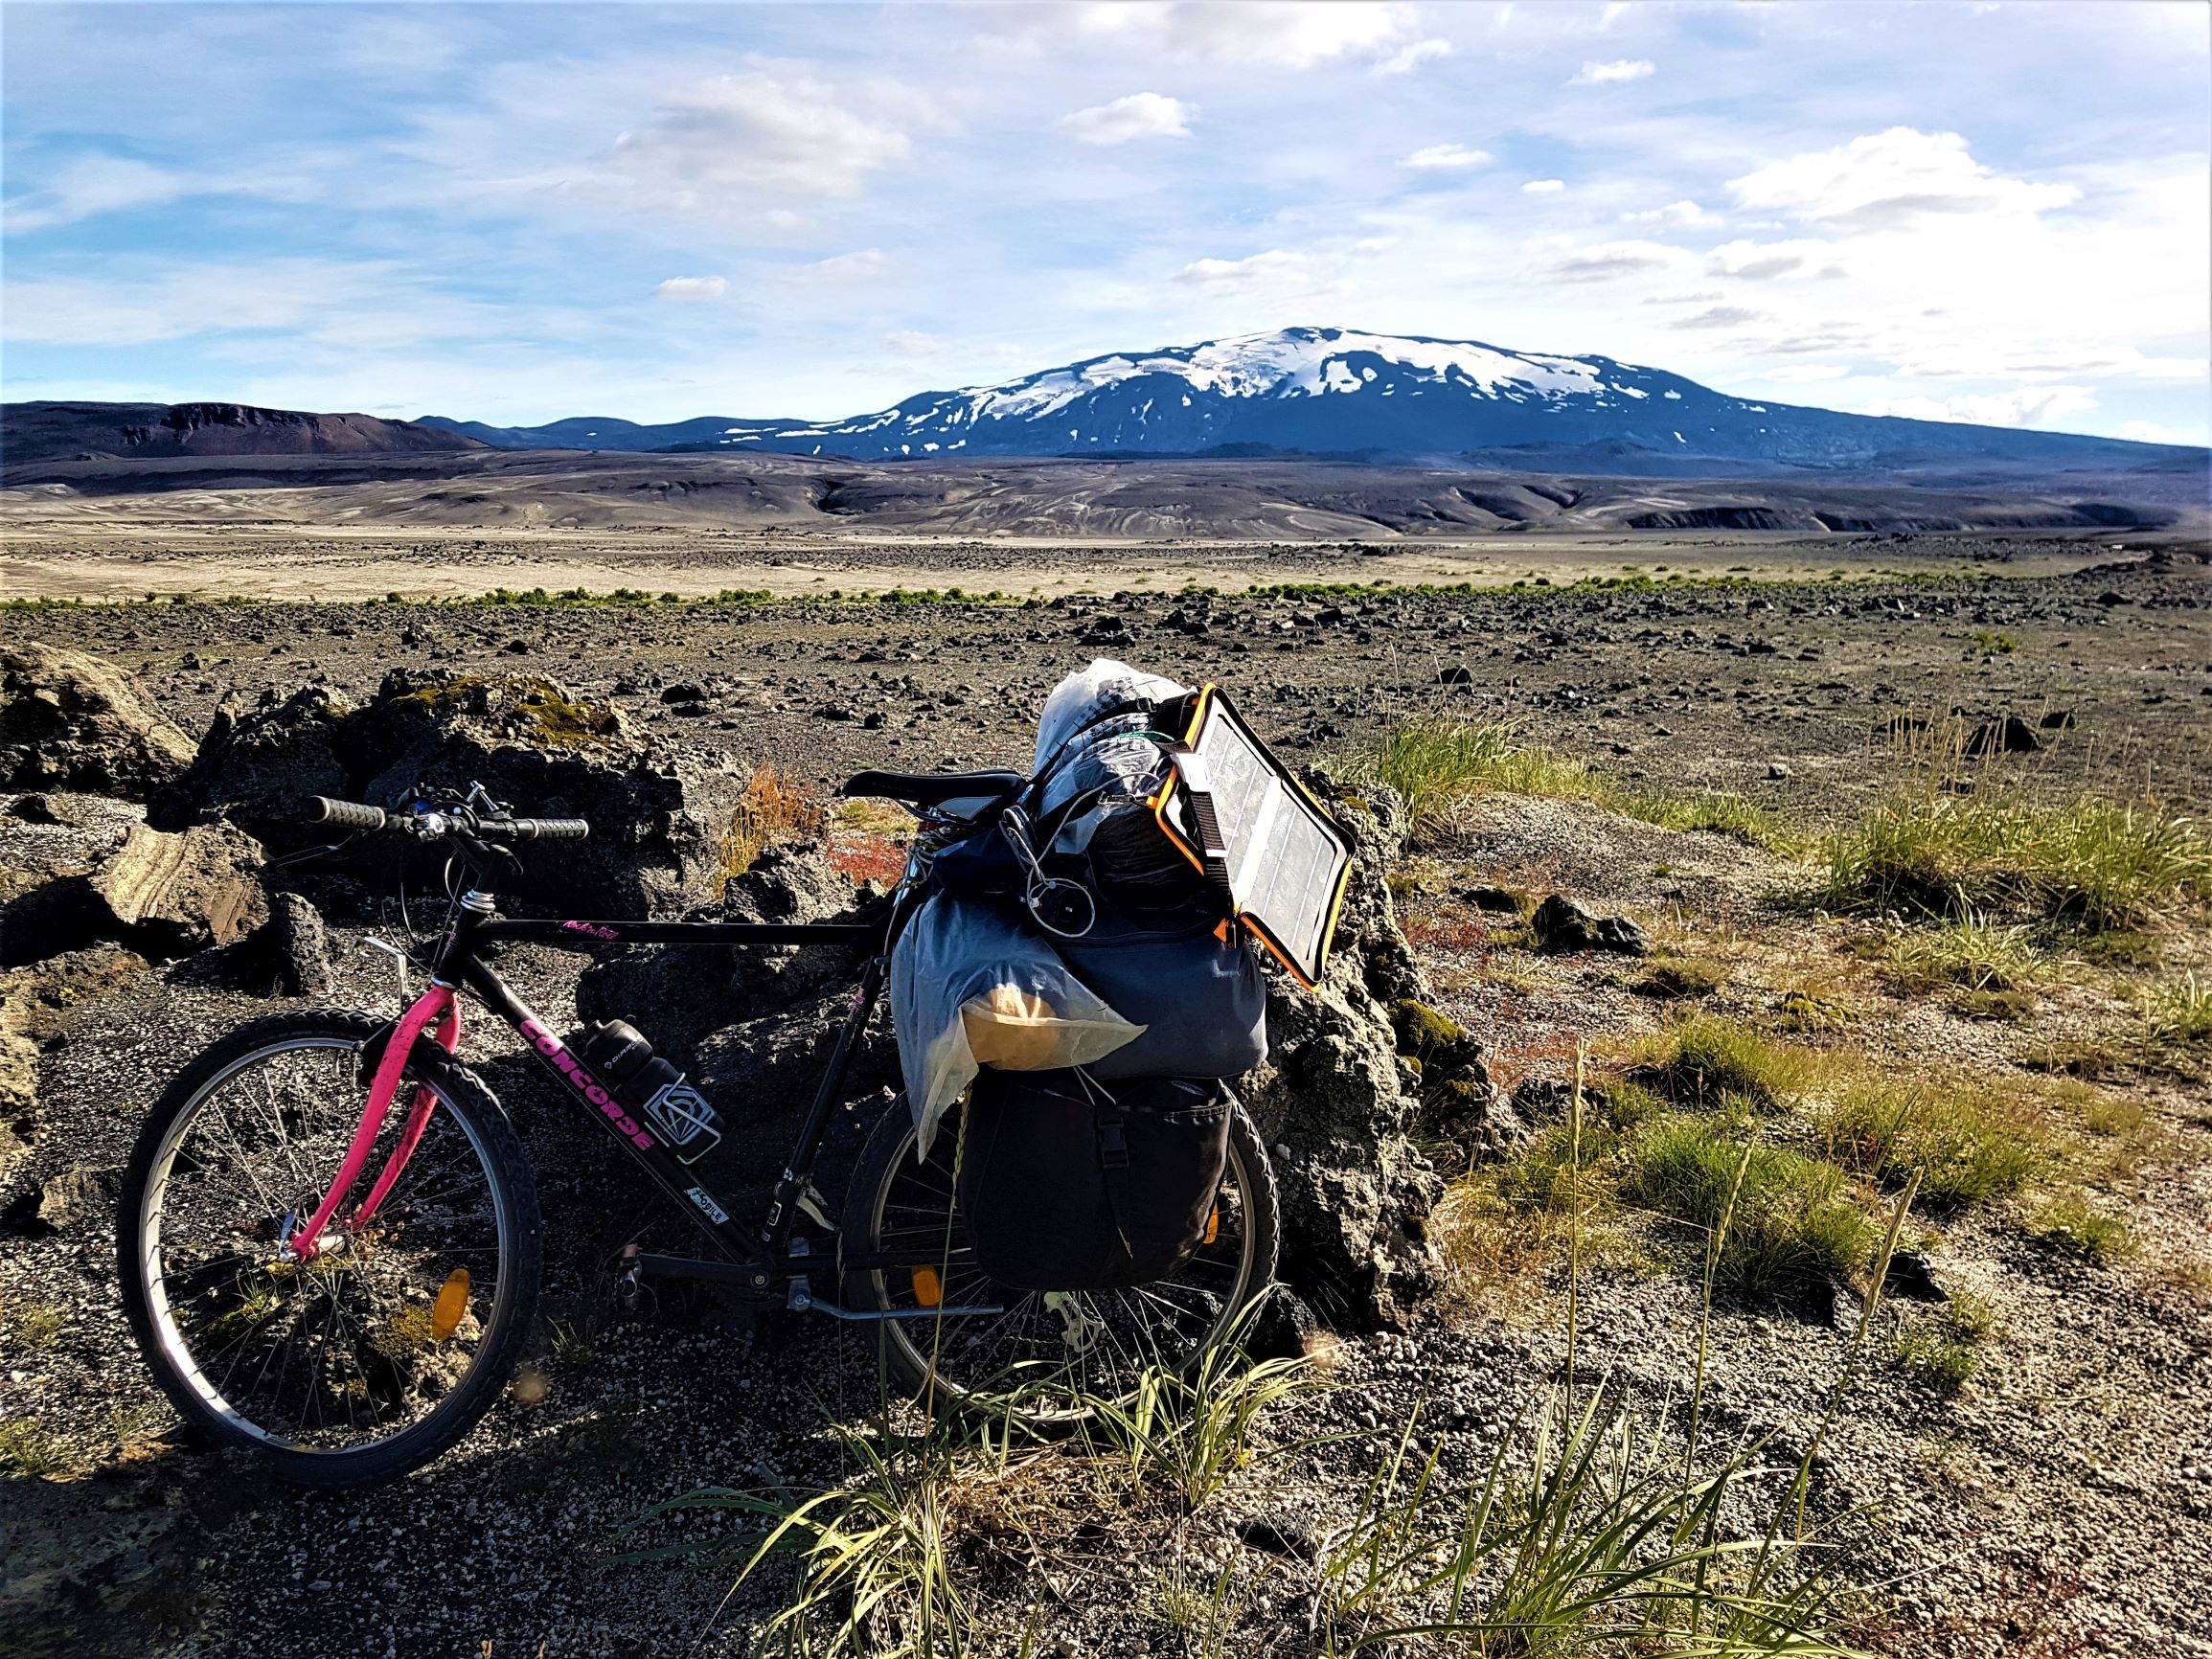 A bike packed with bags on an eco-cycling trip through Iceland's unusual volcanic terrain